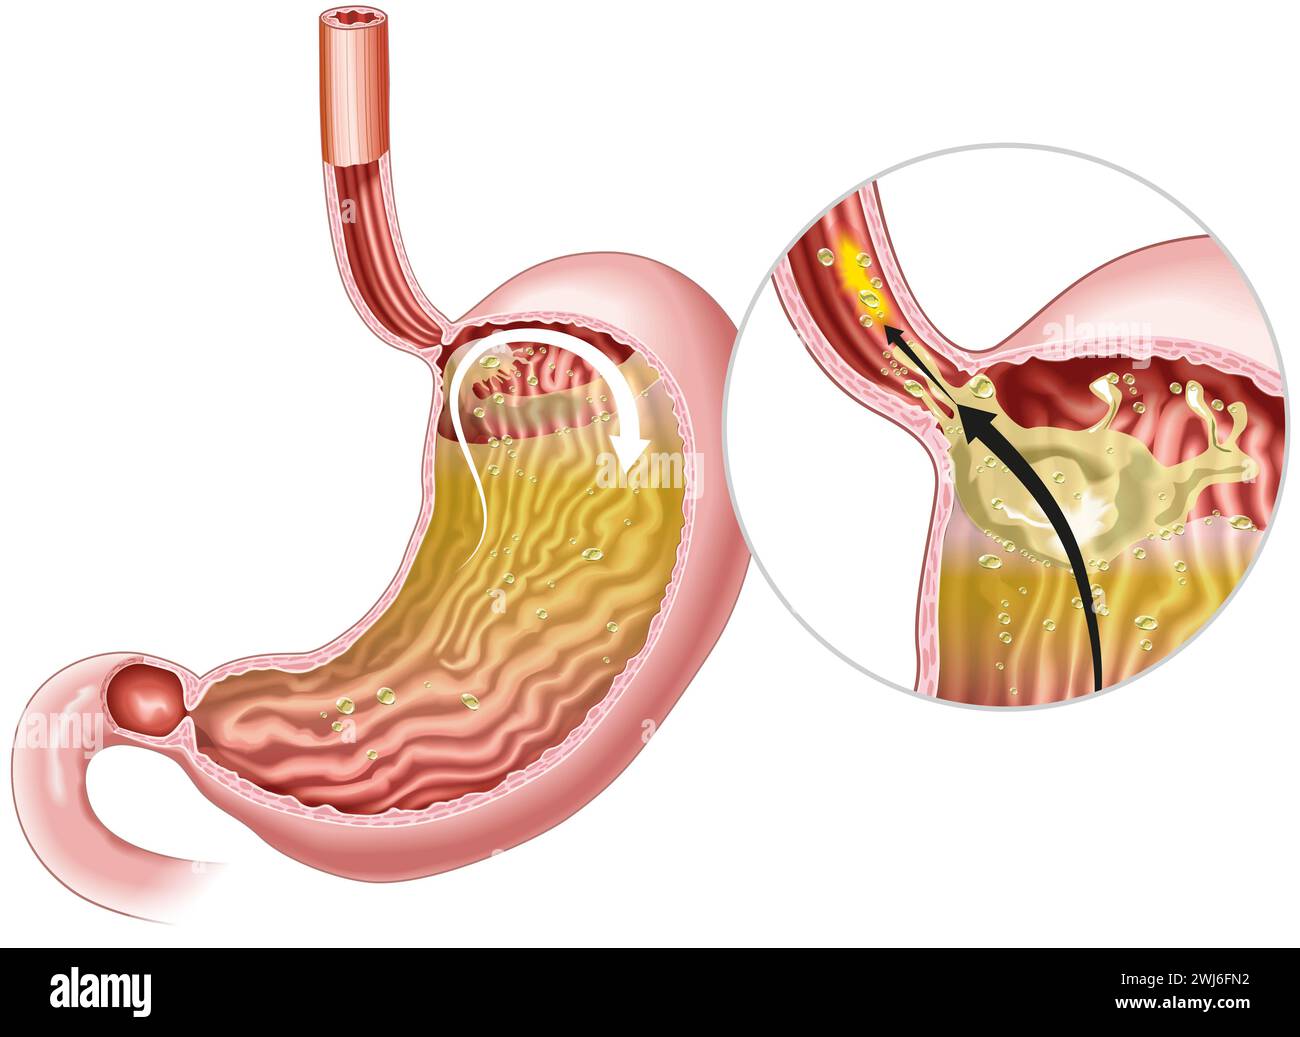 Illustration showing Gastrophageal reflux disease (GERD) is a digestive disorder where stomach acid flows back into the esophagus, causing discomfort Stock Photo